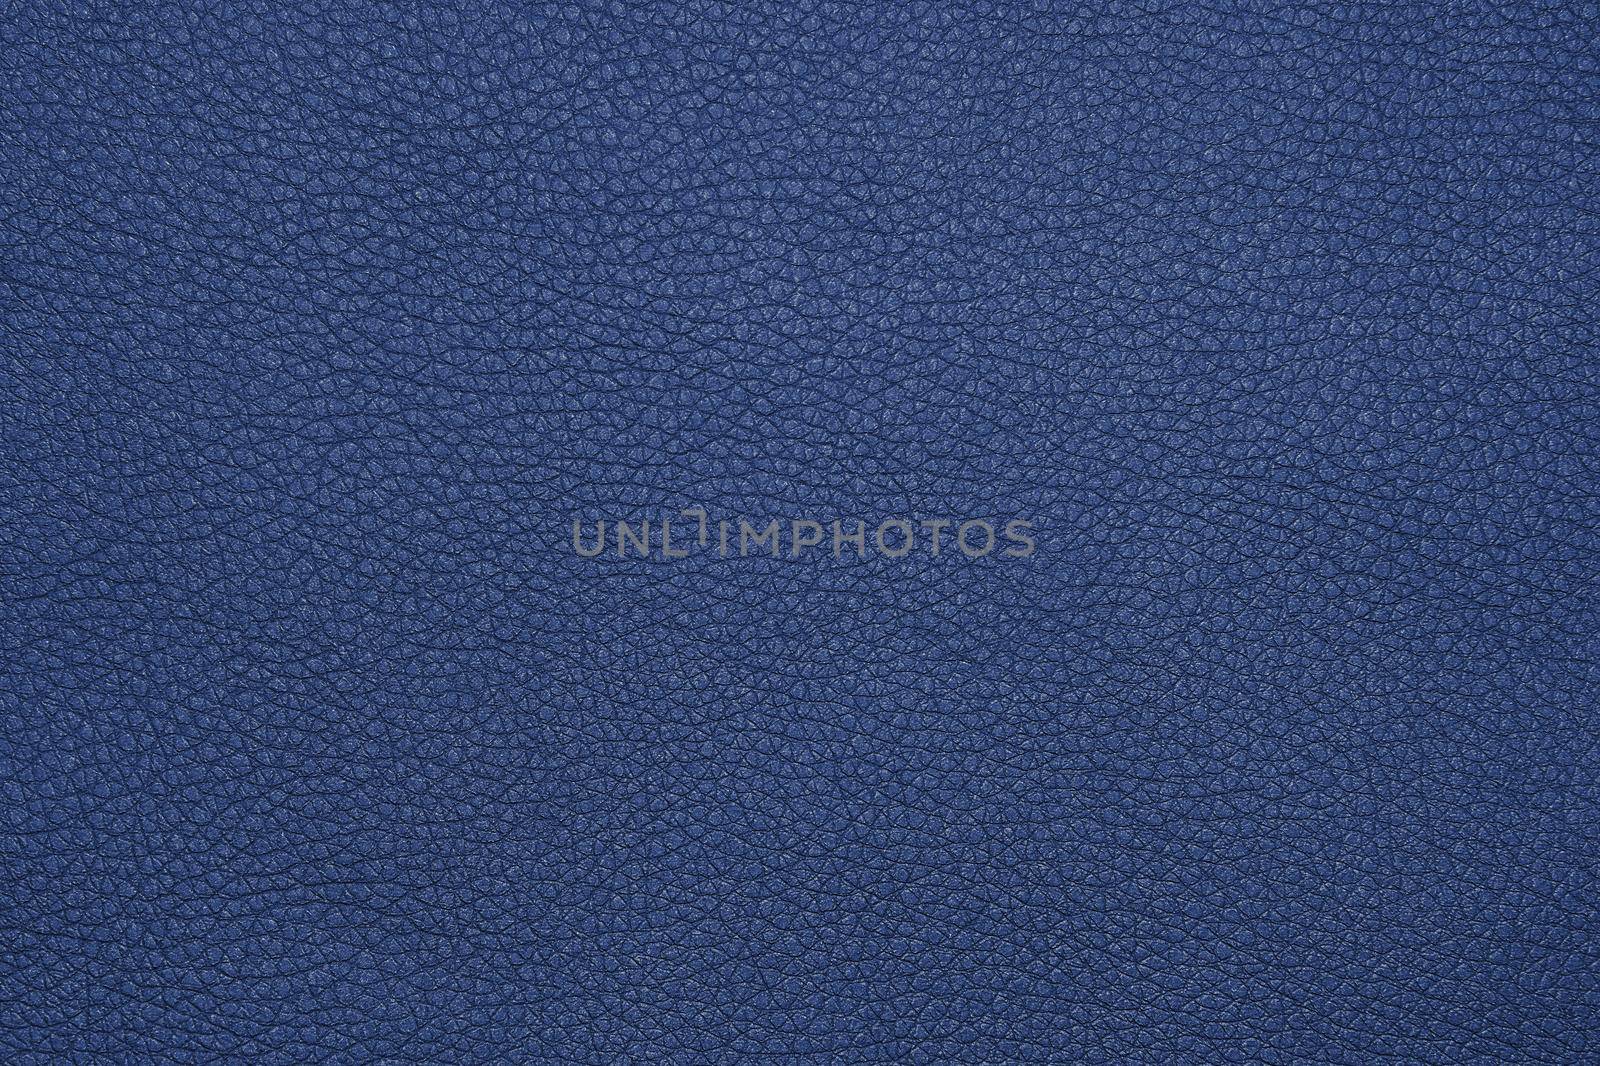 Close up background texture pattern of indigo blue natural leather grain, directly above